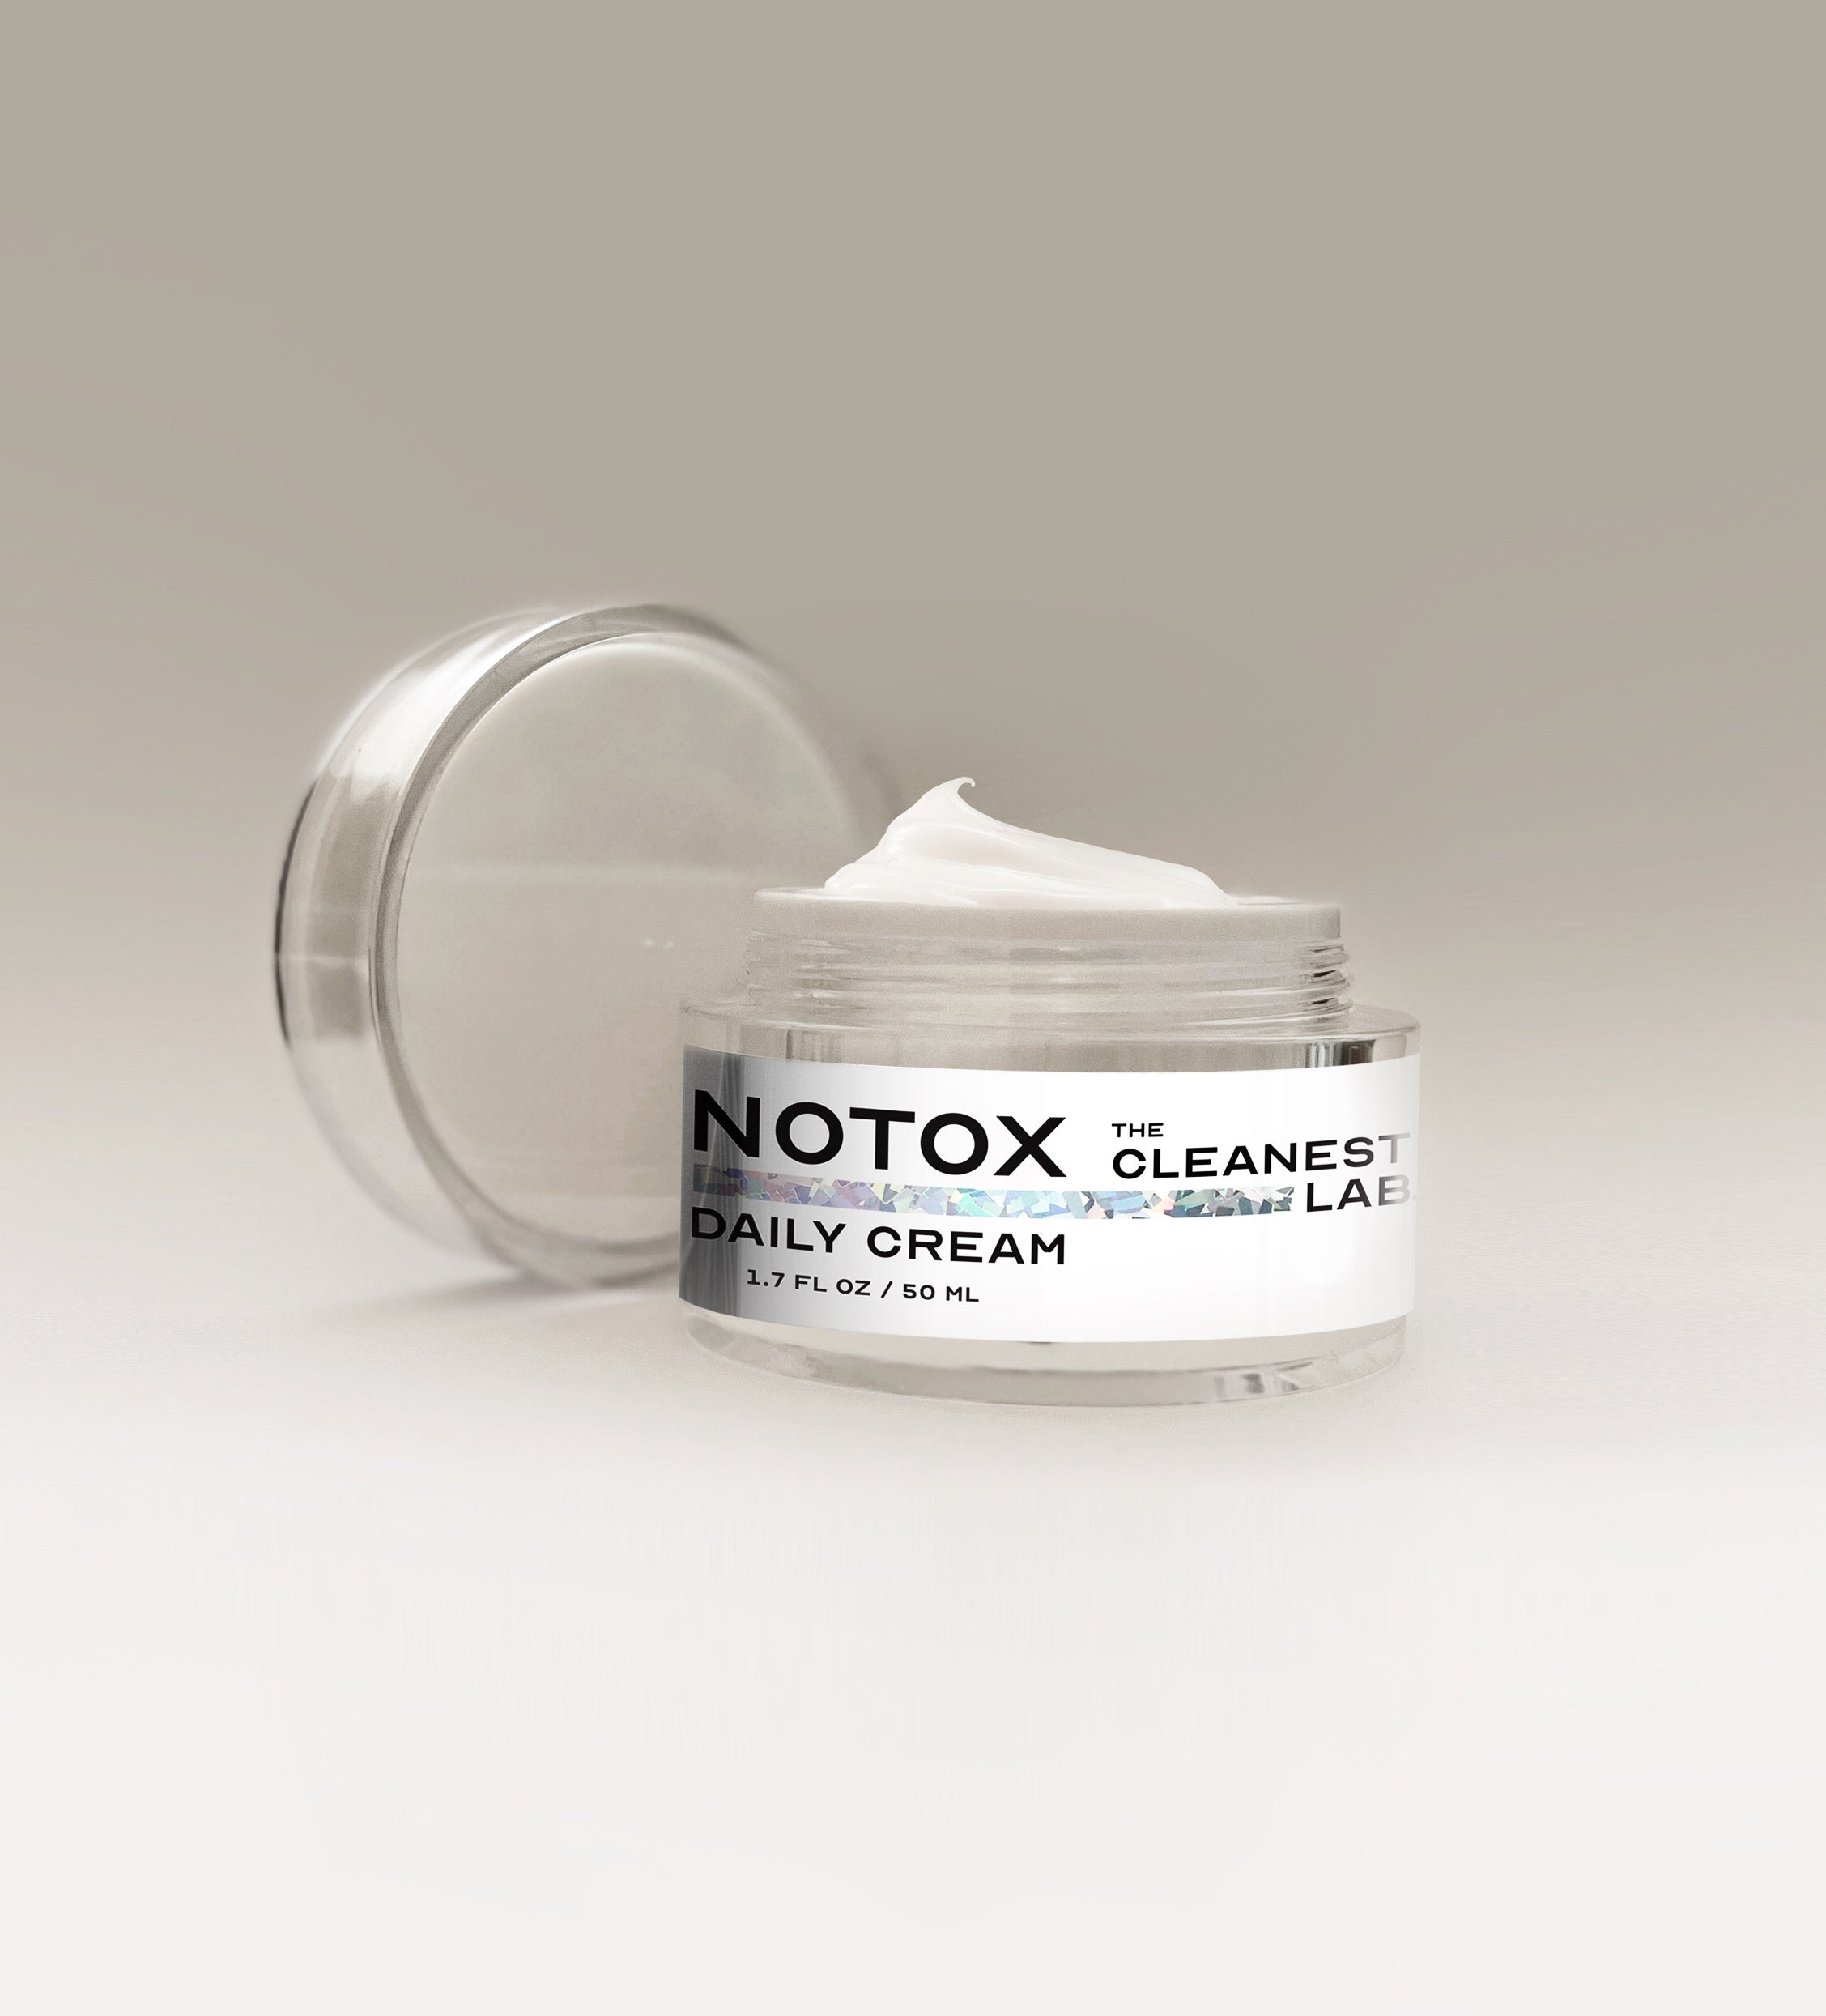 NOTOX® Daily Cream by The Cleanest Lab